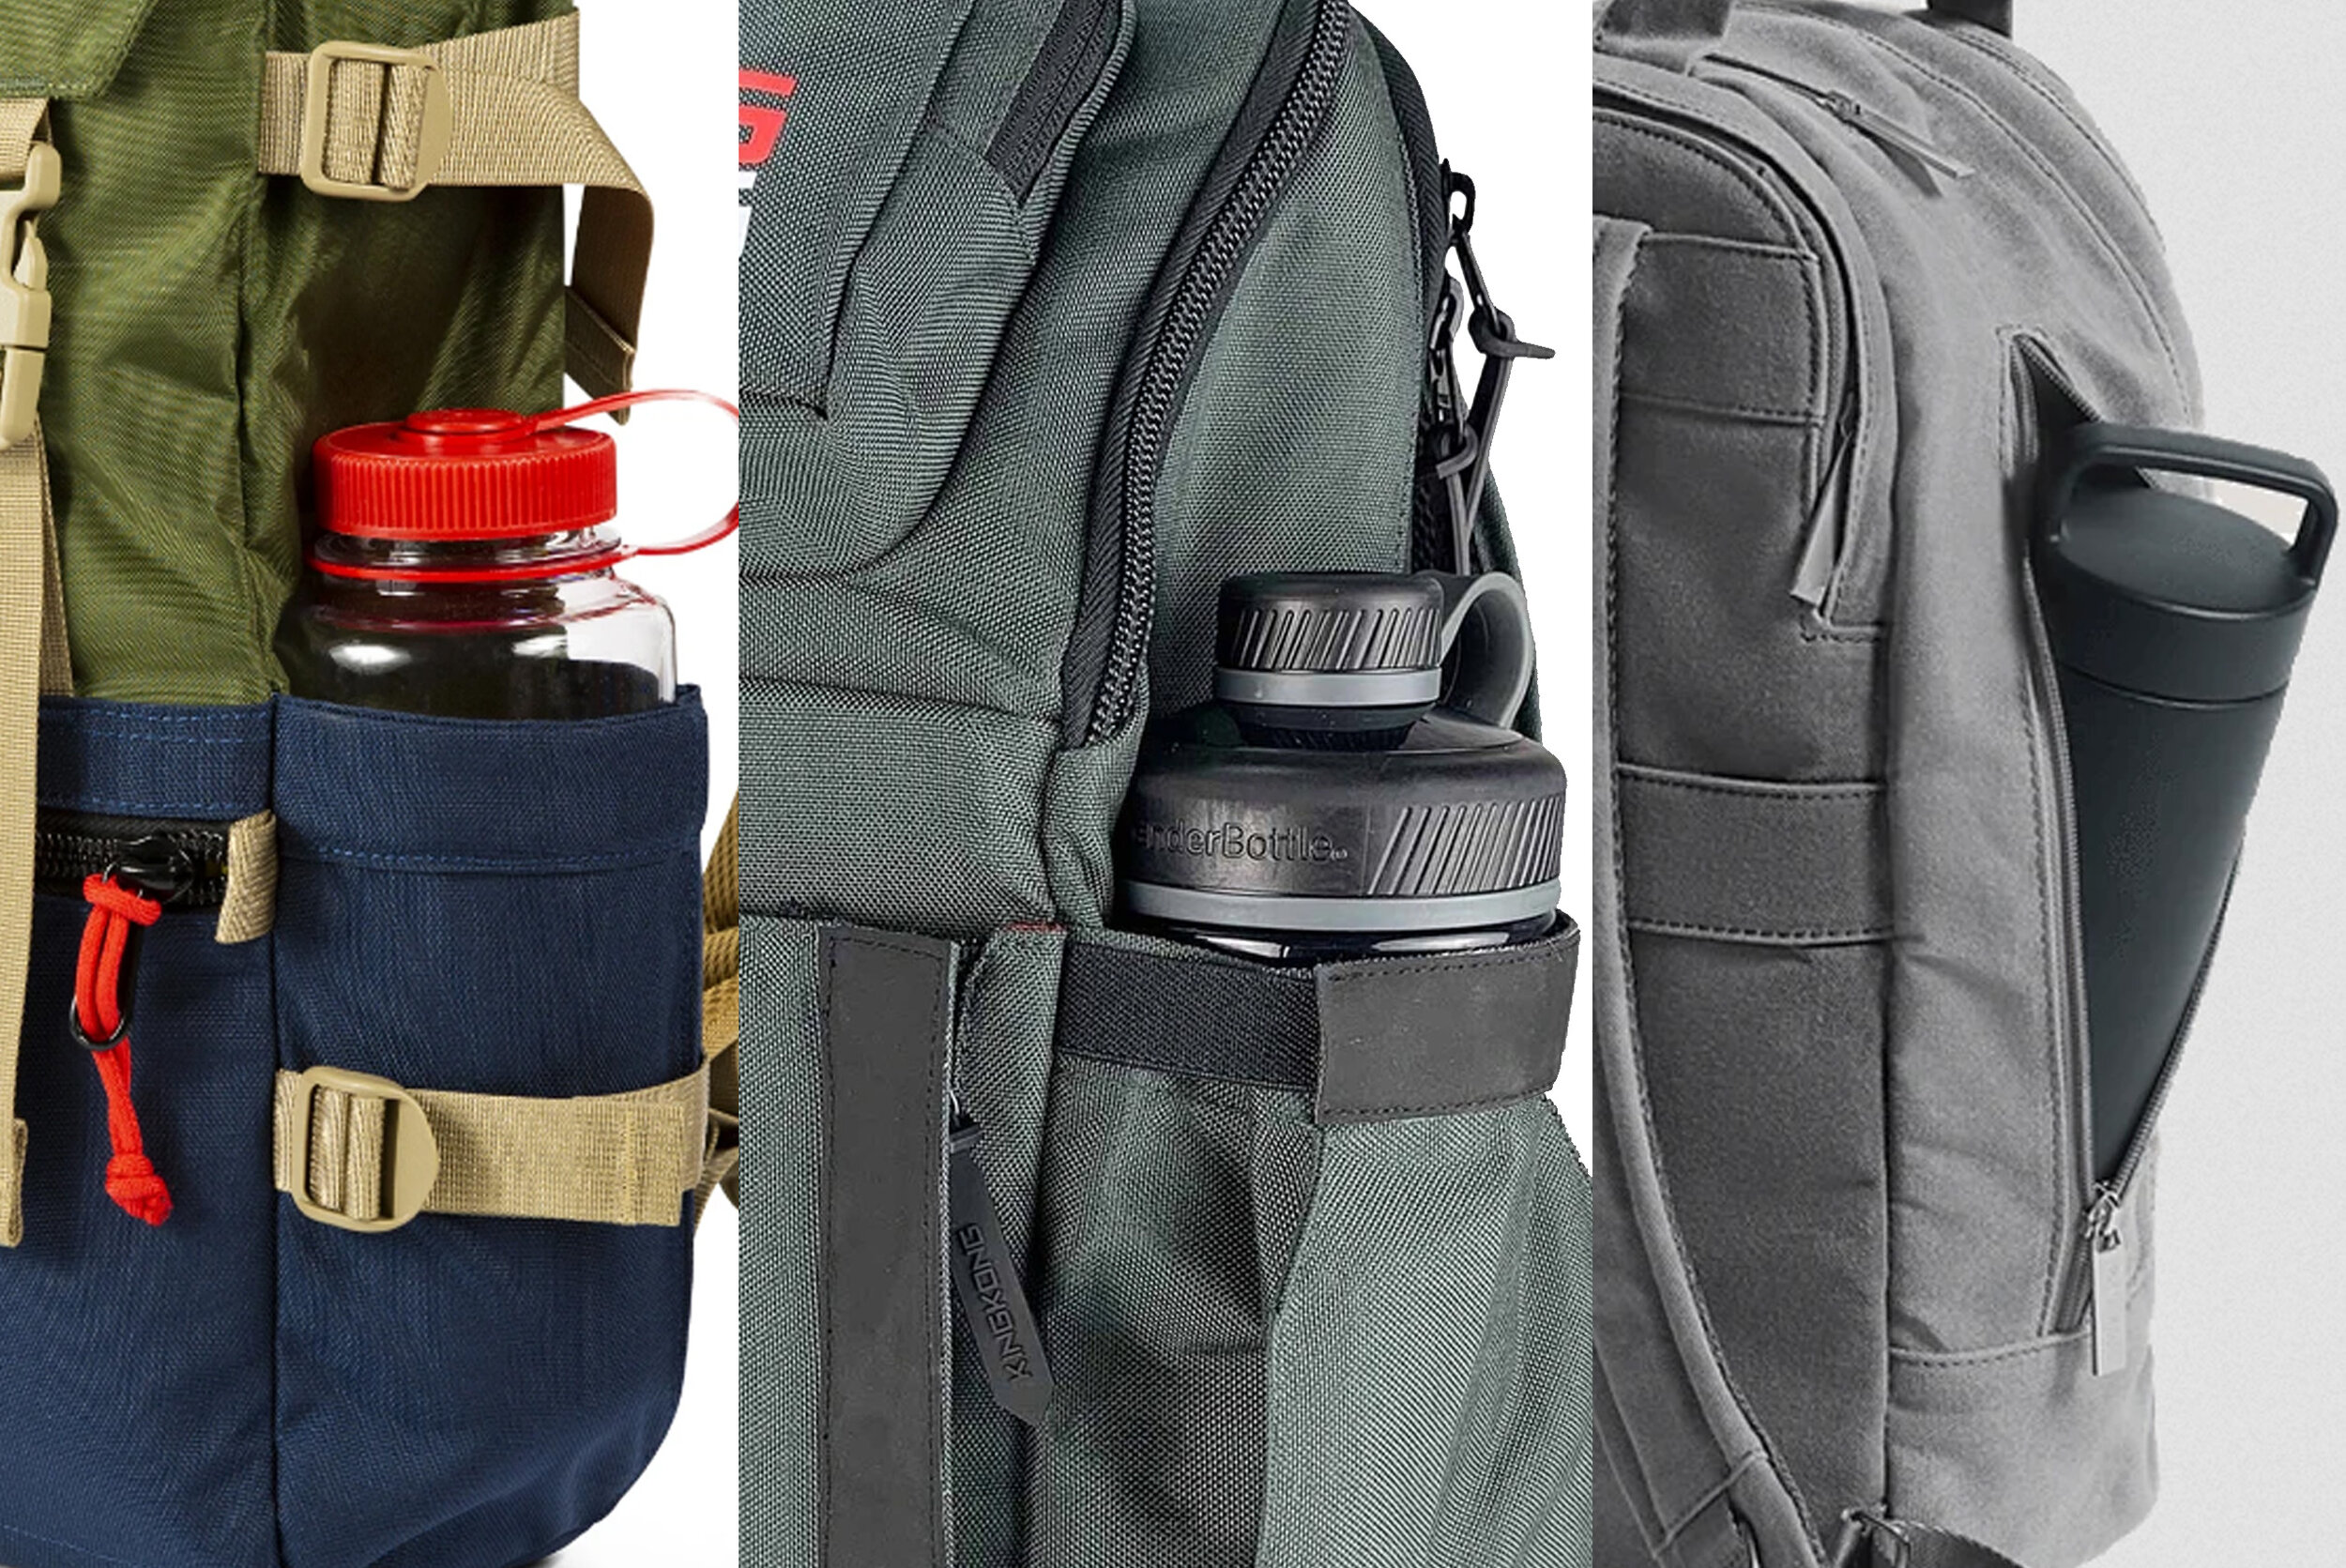 north face backpack with water bottle holder